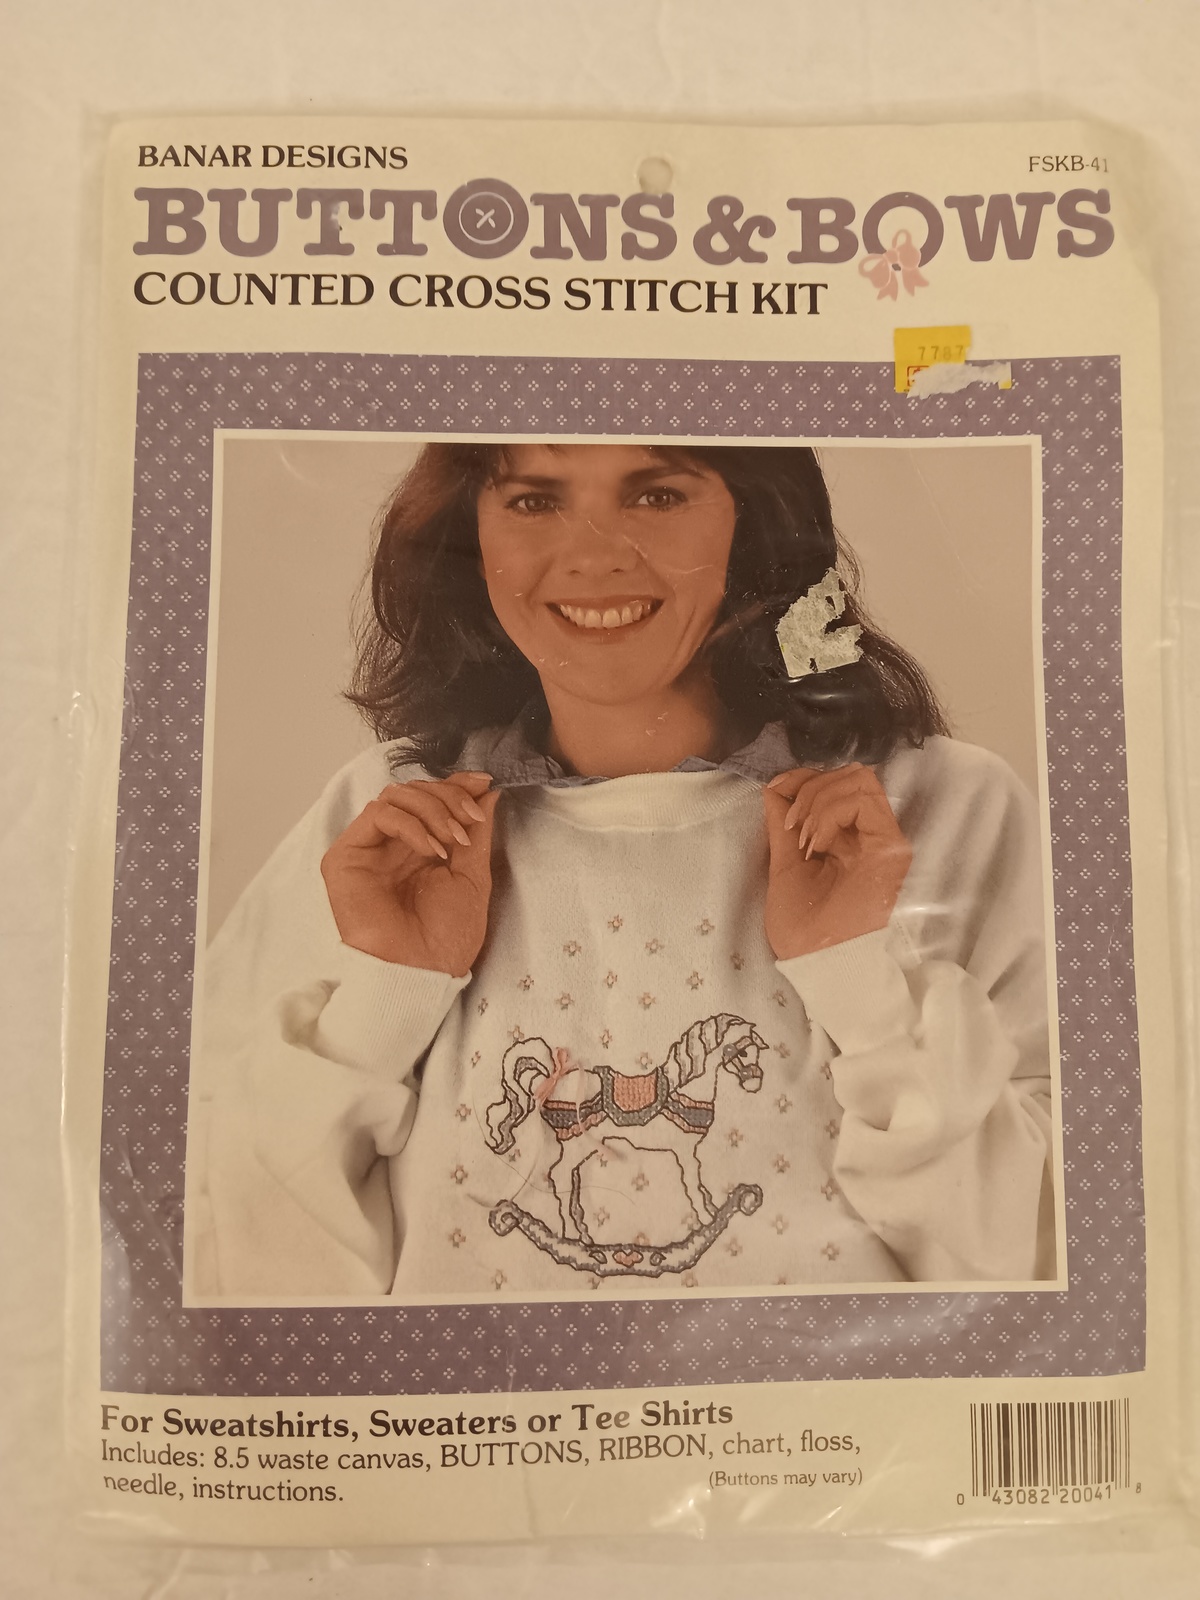 Banar Designs Buttons & Bows Counted Cross Stitch Kit Rocking Horse FSKB-41 New - $17.99